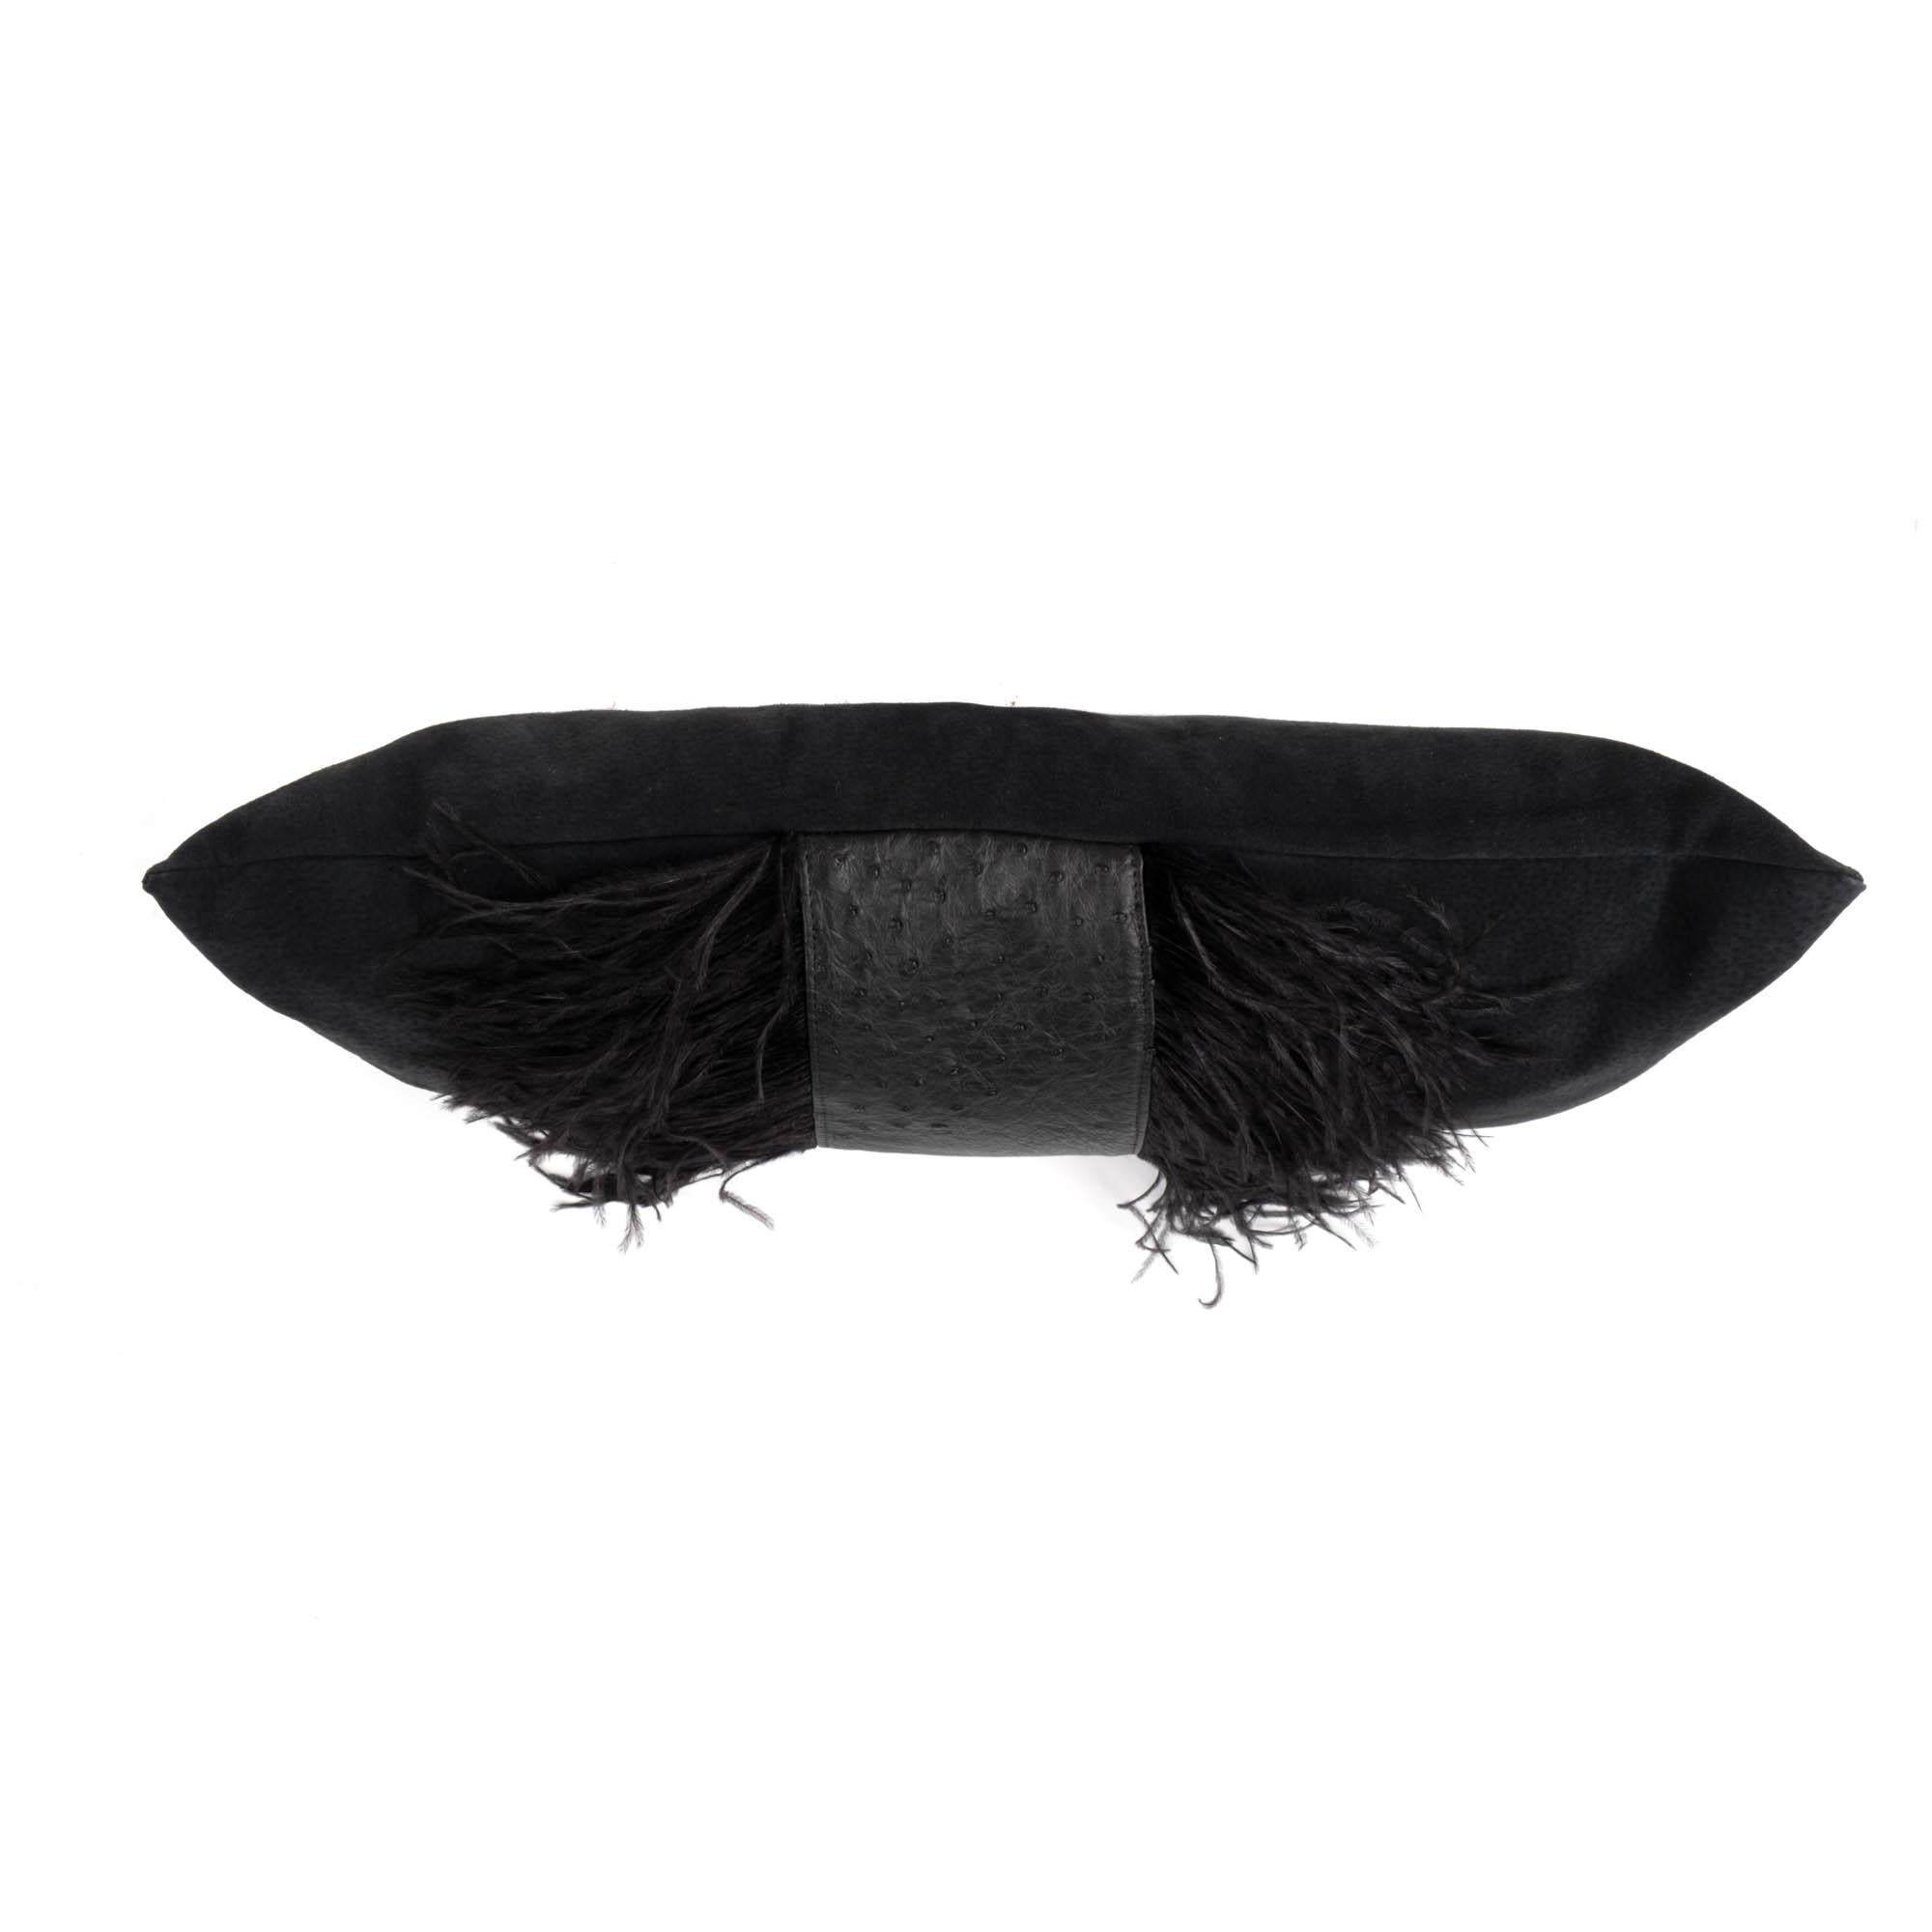 Ostrich Leather Inset Pillow with Feather Trim on Suede - Black